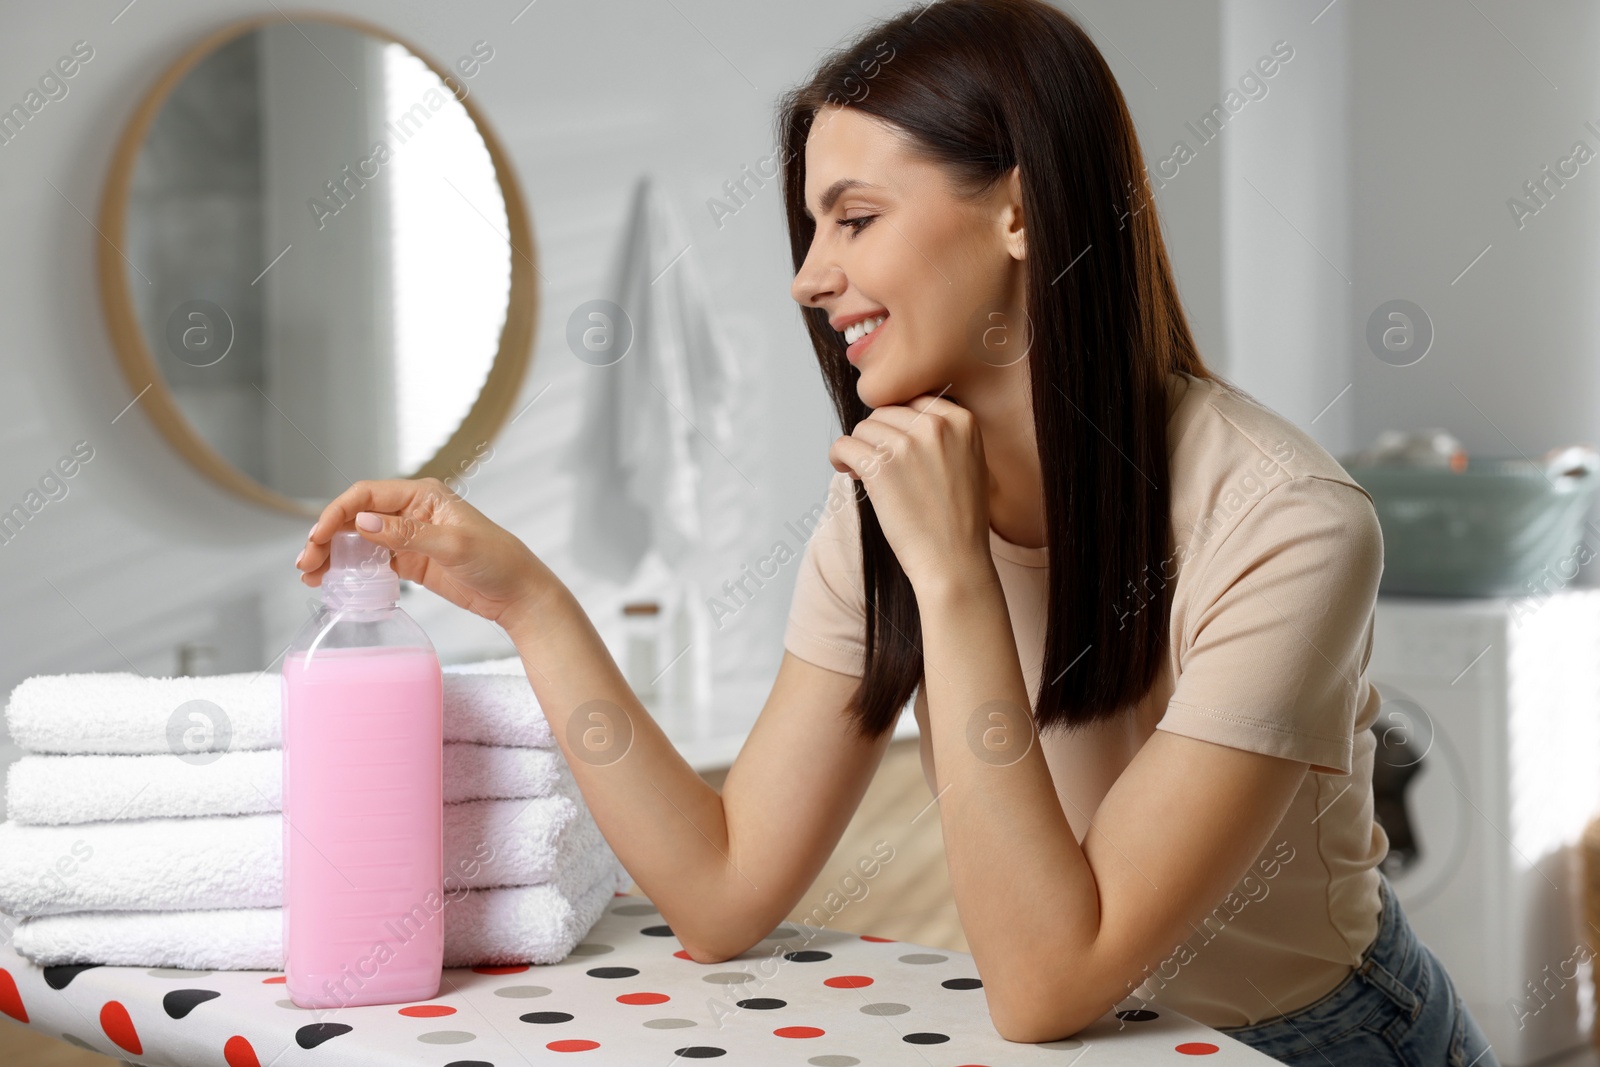 Photo of Woman near clean towels and fabric softener in bathroom